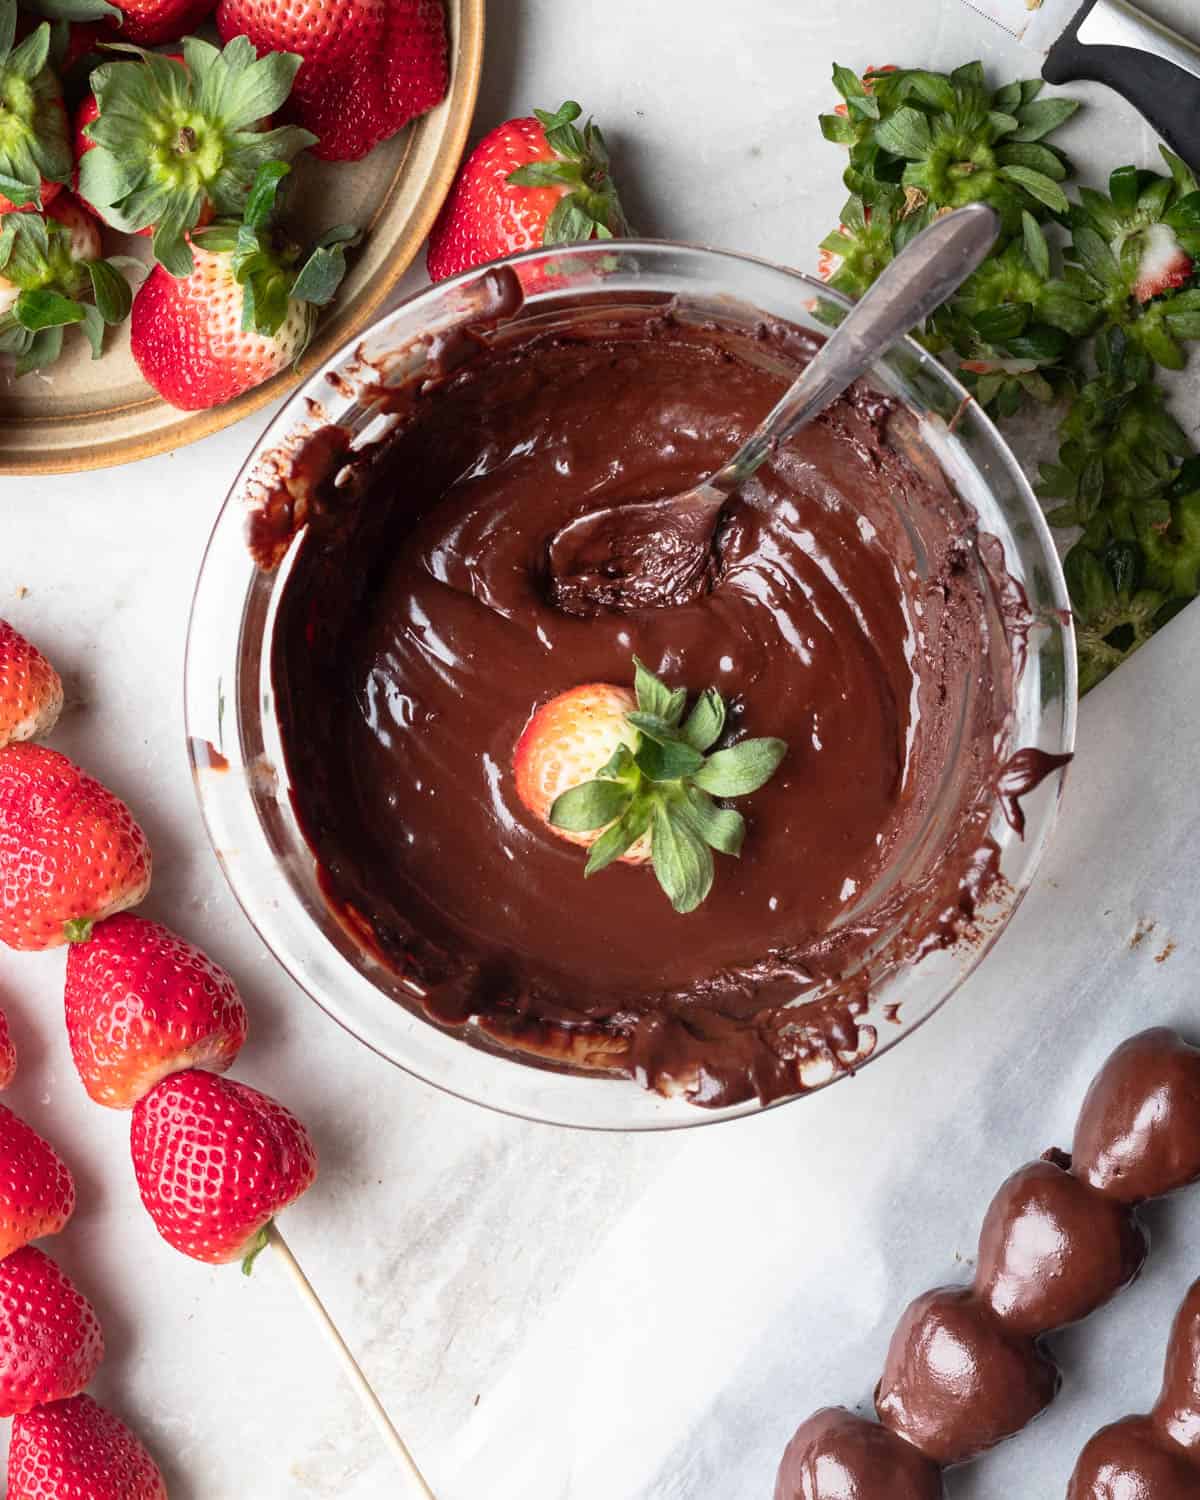 A glass bowl of dark melted chocolate with a strawberry being dipped inside.